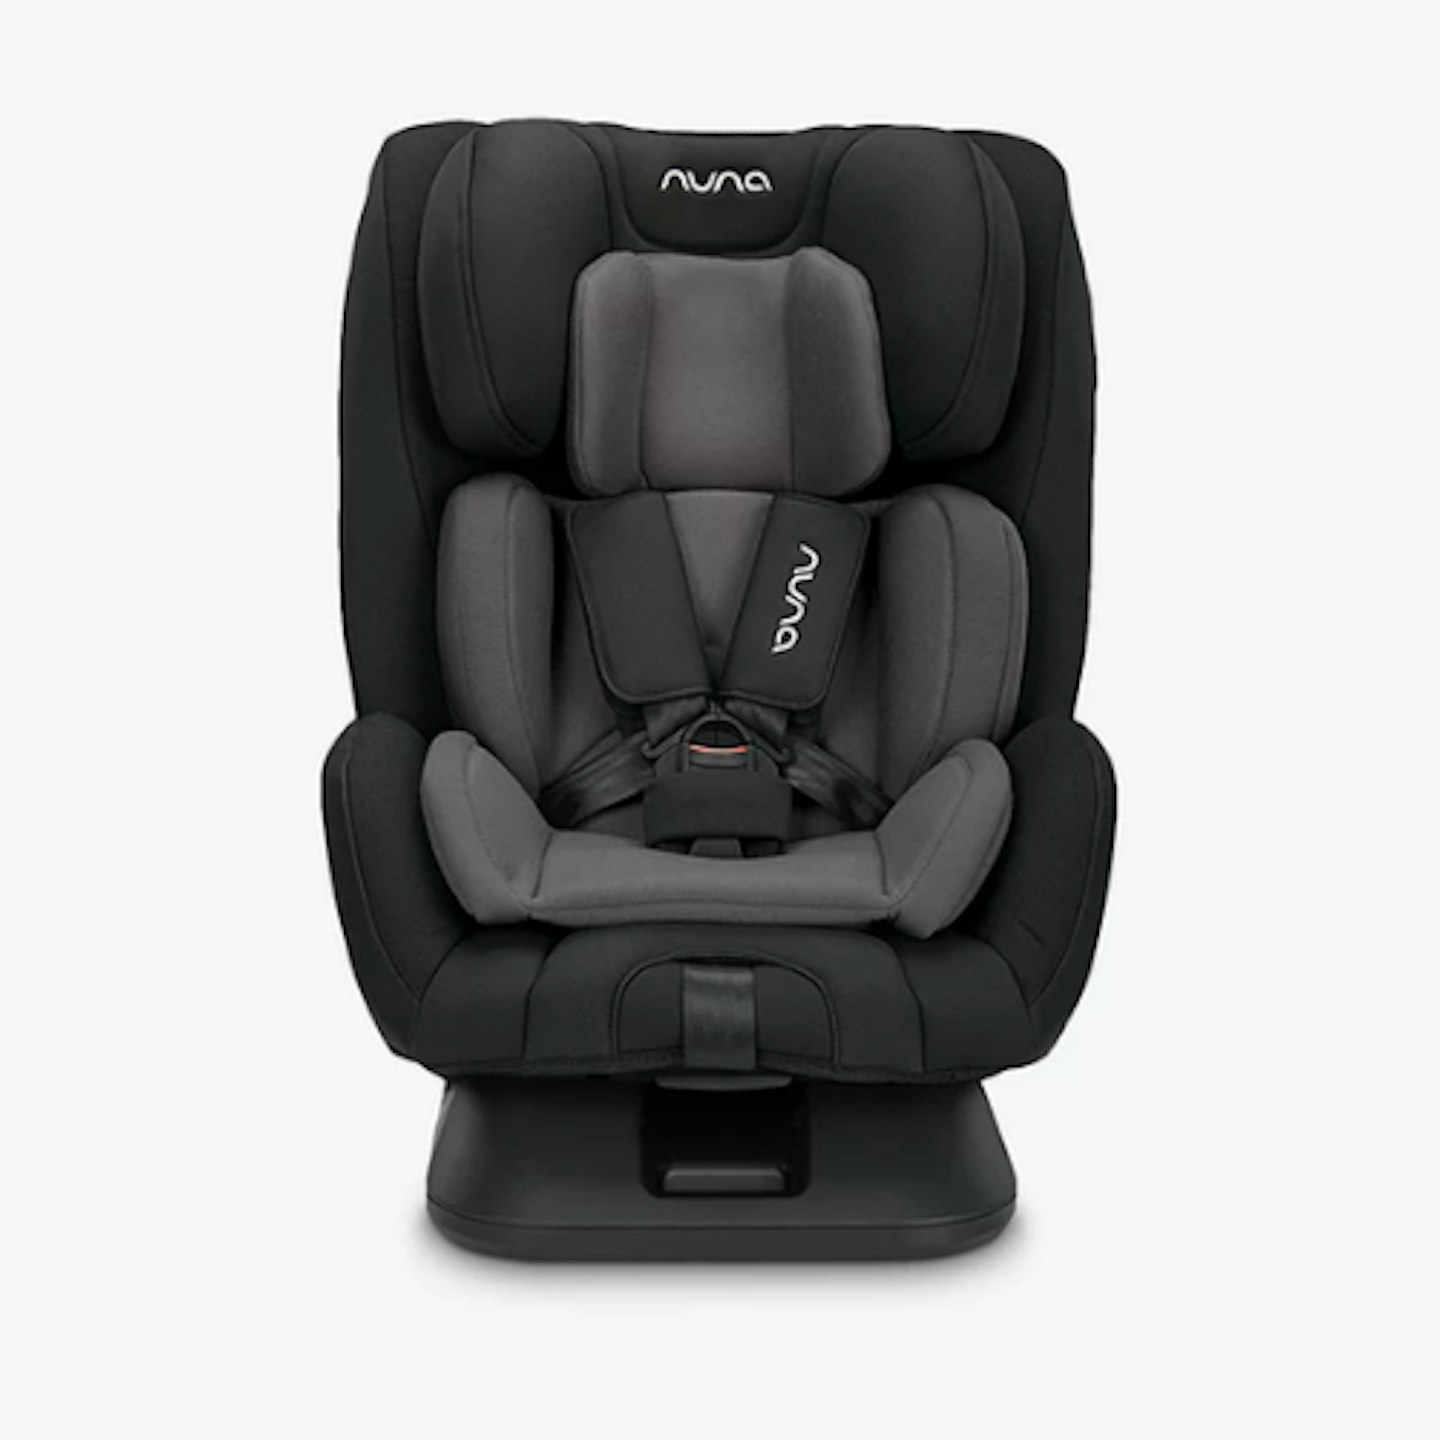 best car seats for 3 year olds - Nuna Tres LX i-Size Children's Car Seat